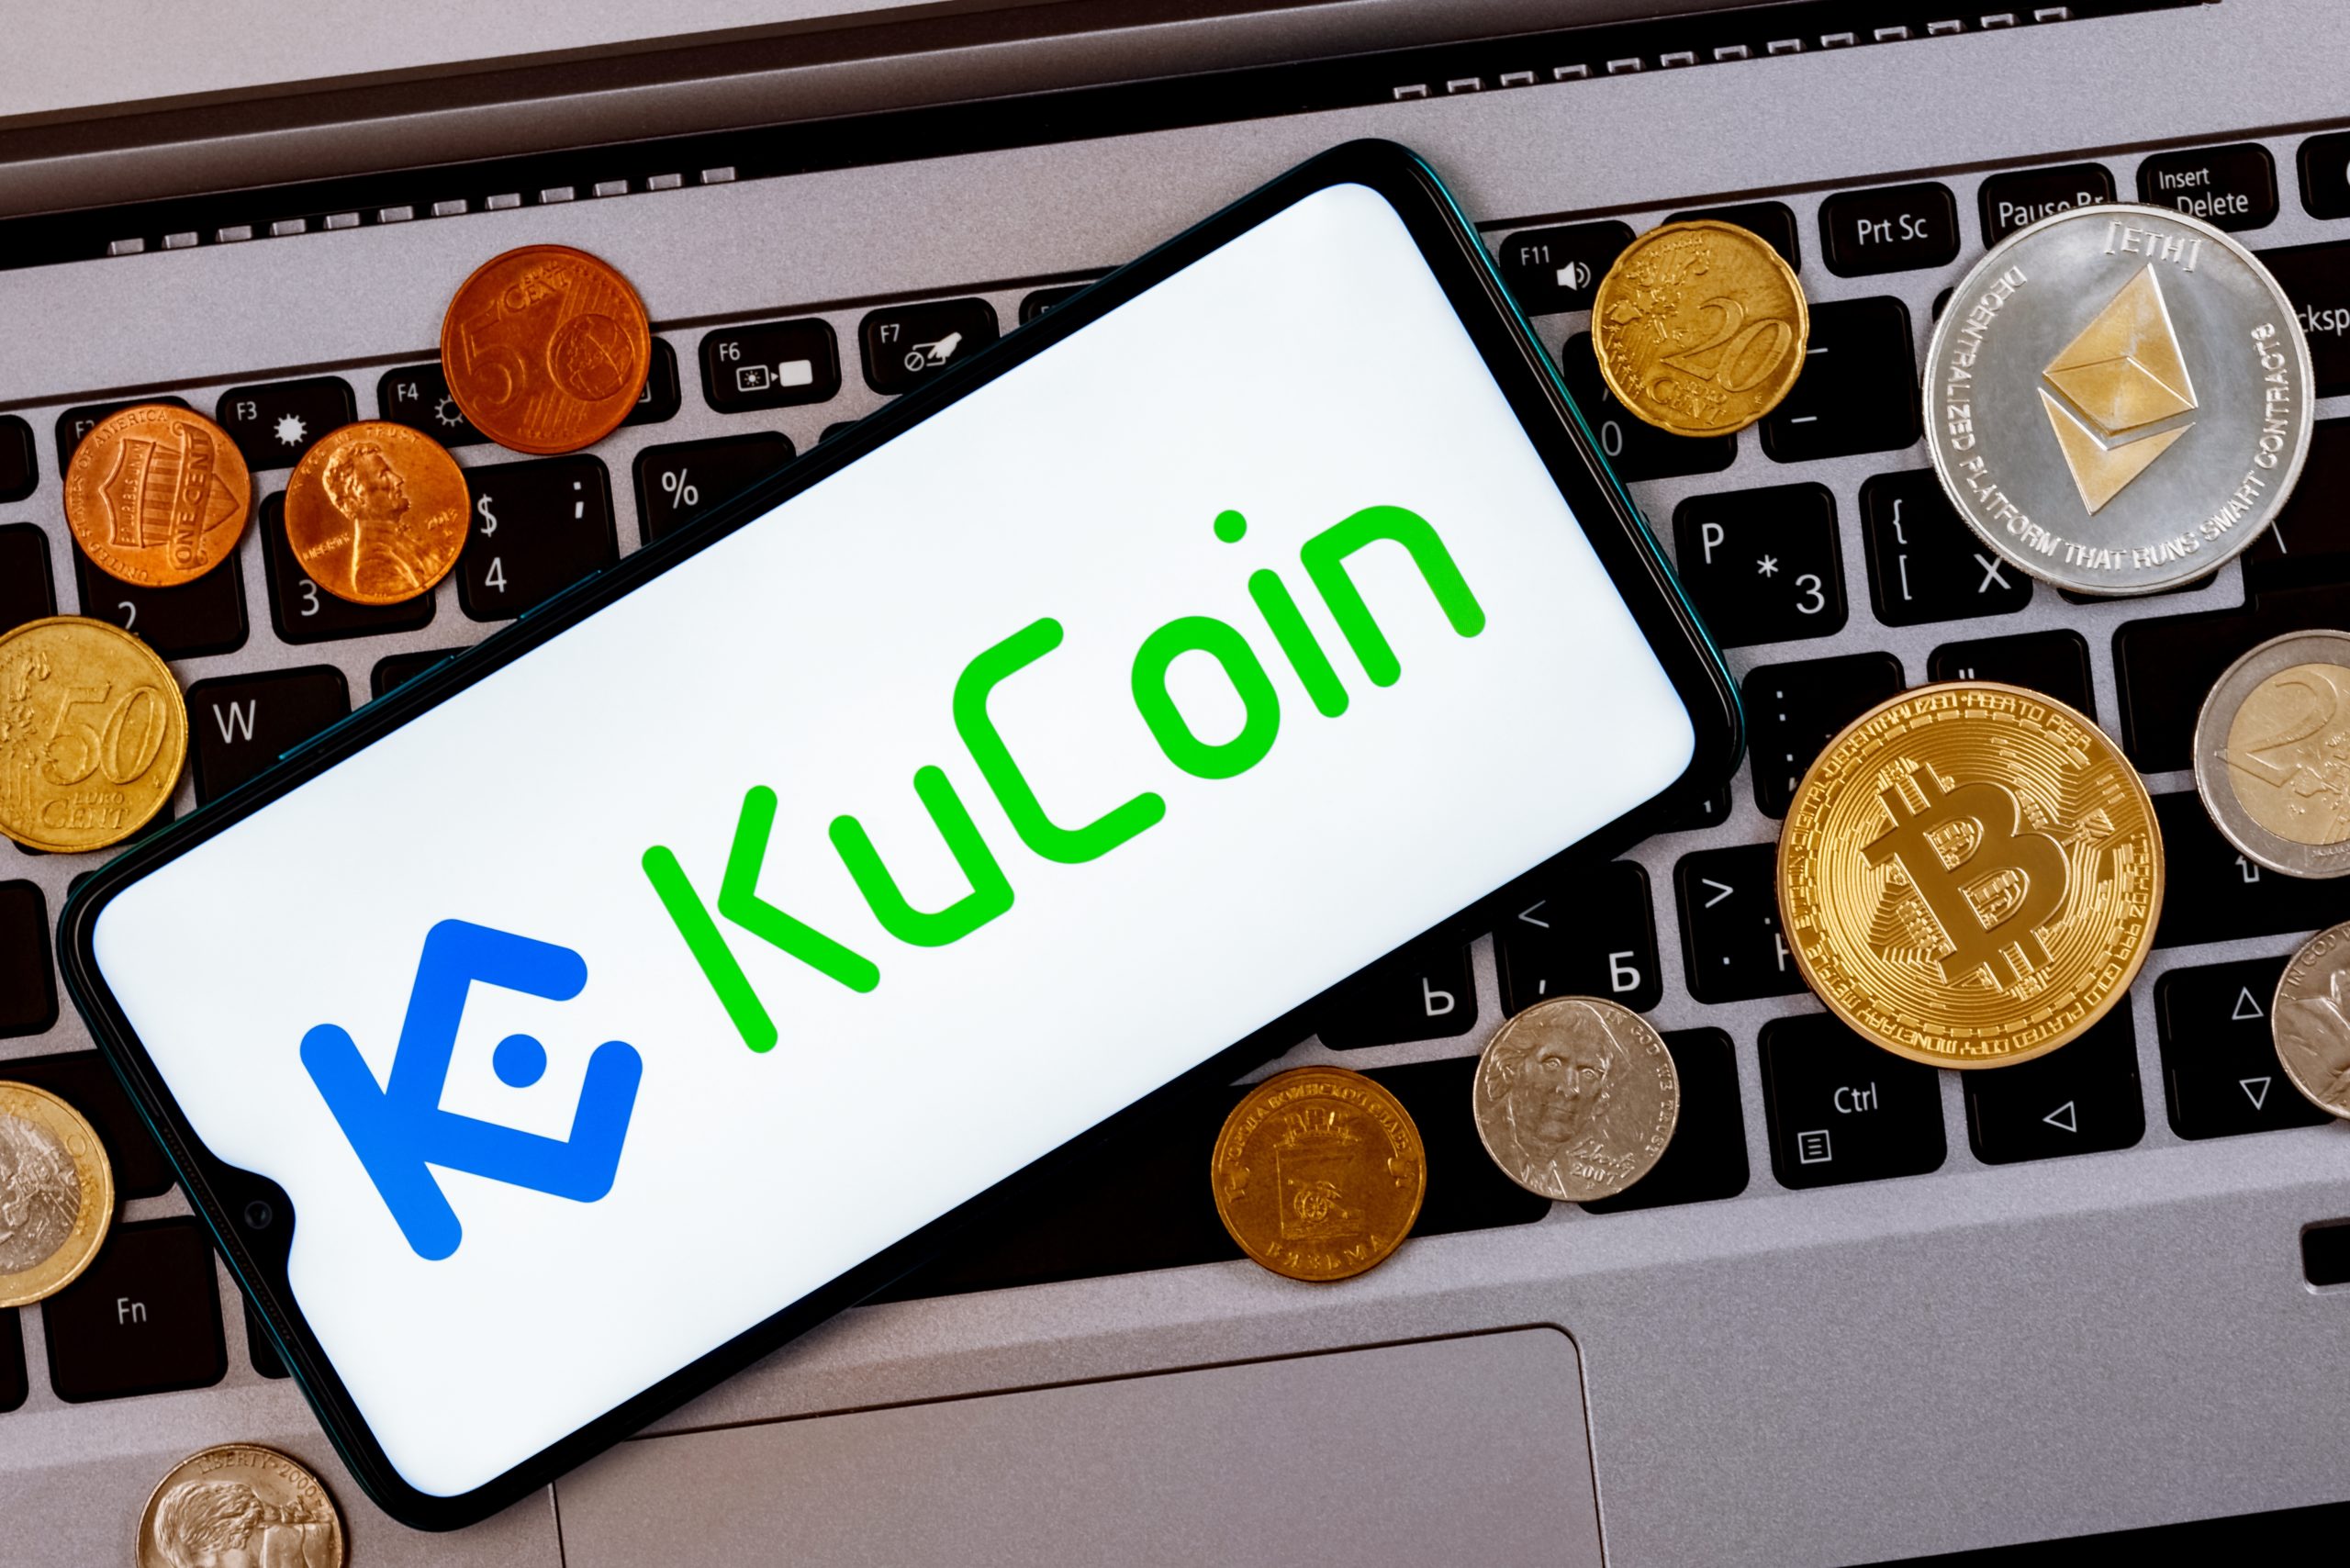 KuCoin Review: Cryptocurrency Exchange With Margin, Futures & Earning Options